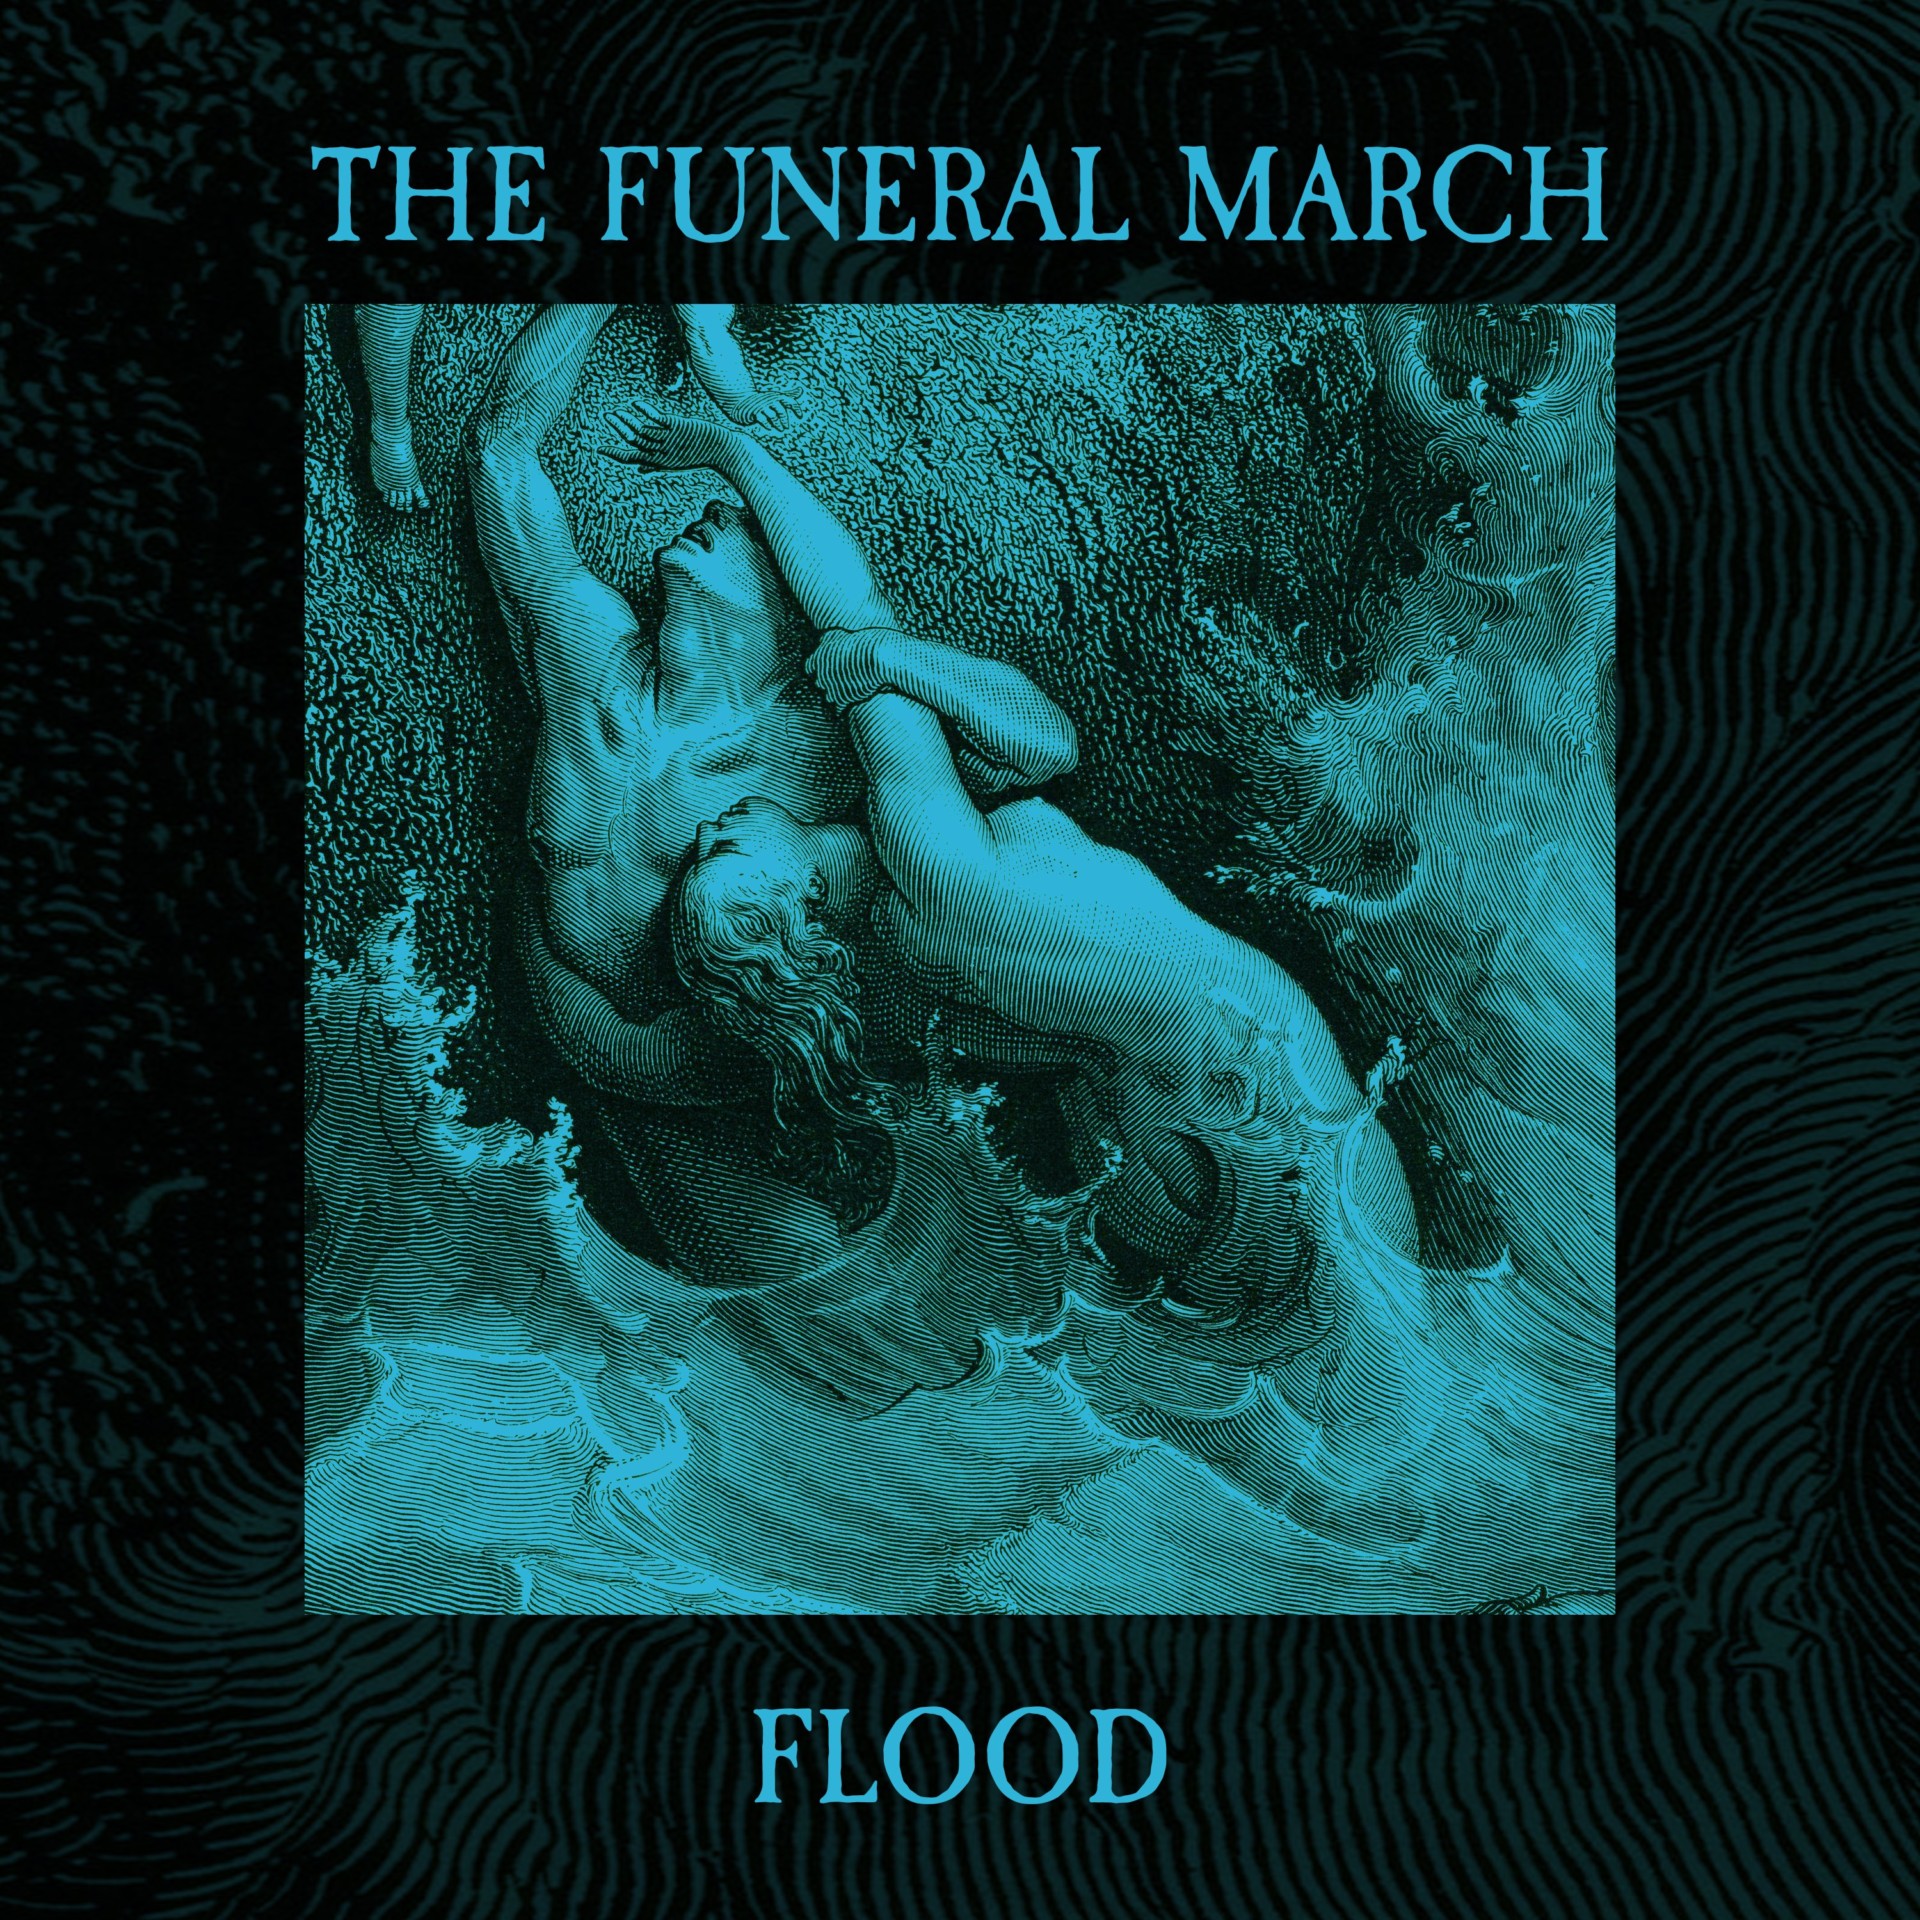 The Funeral March’s 6th release a Darkwave exploration